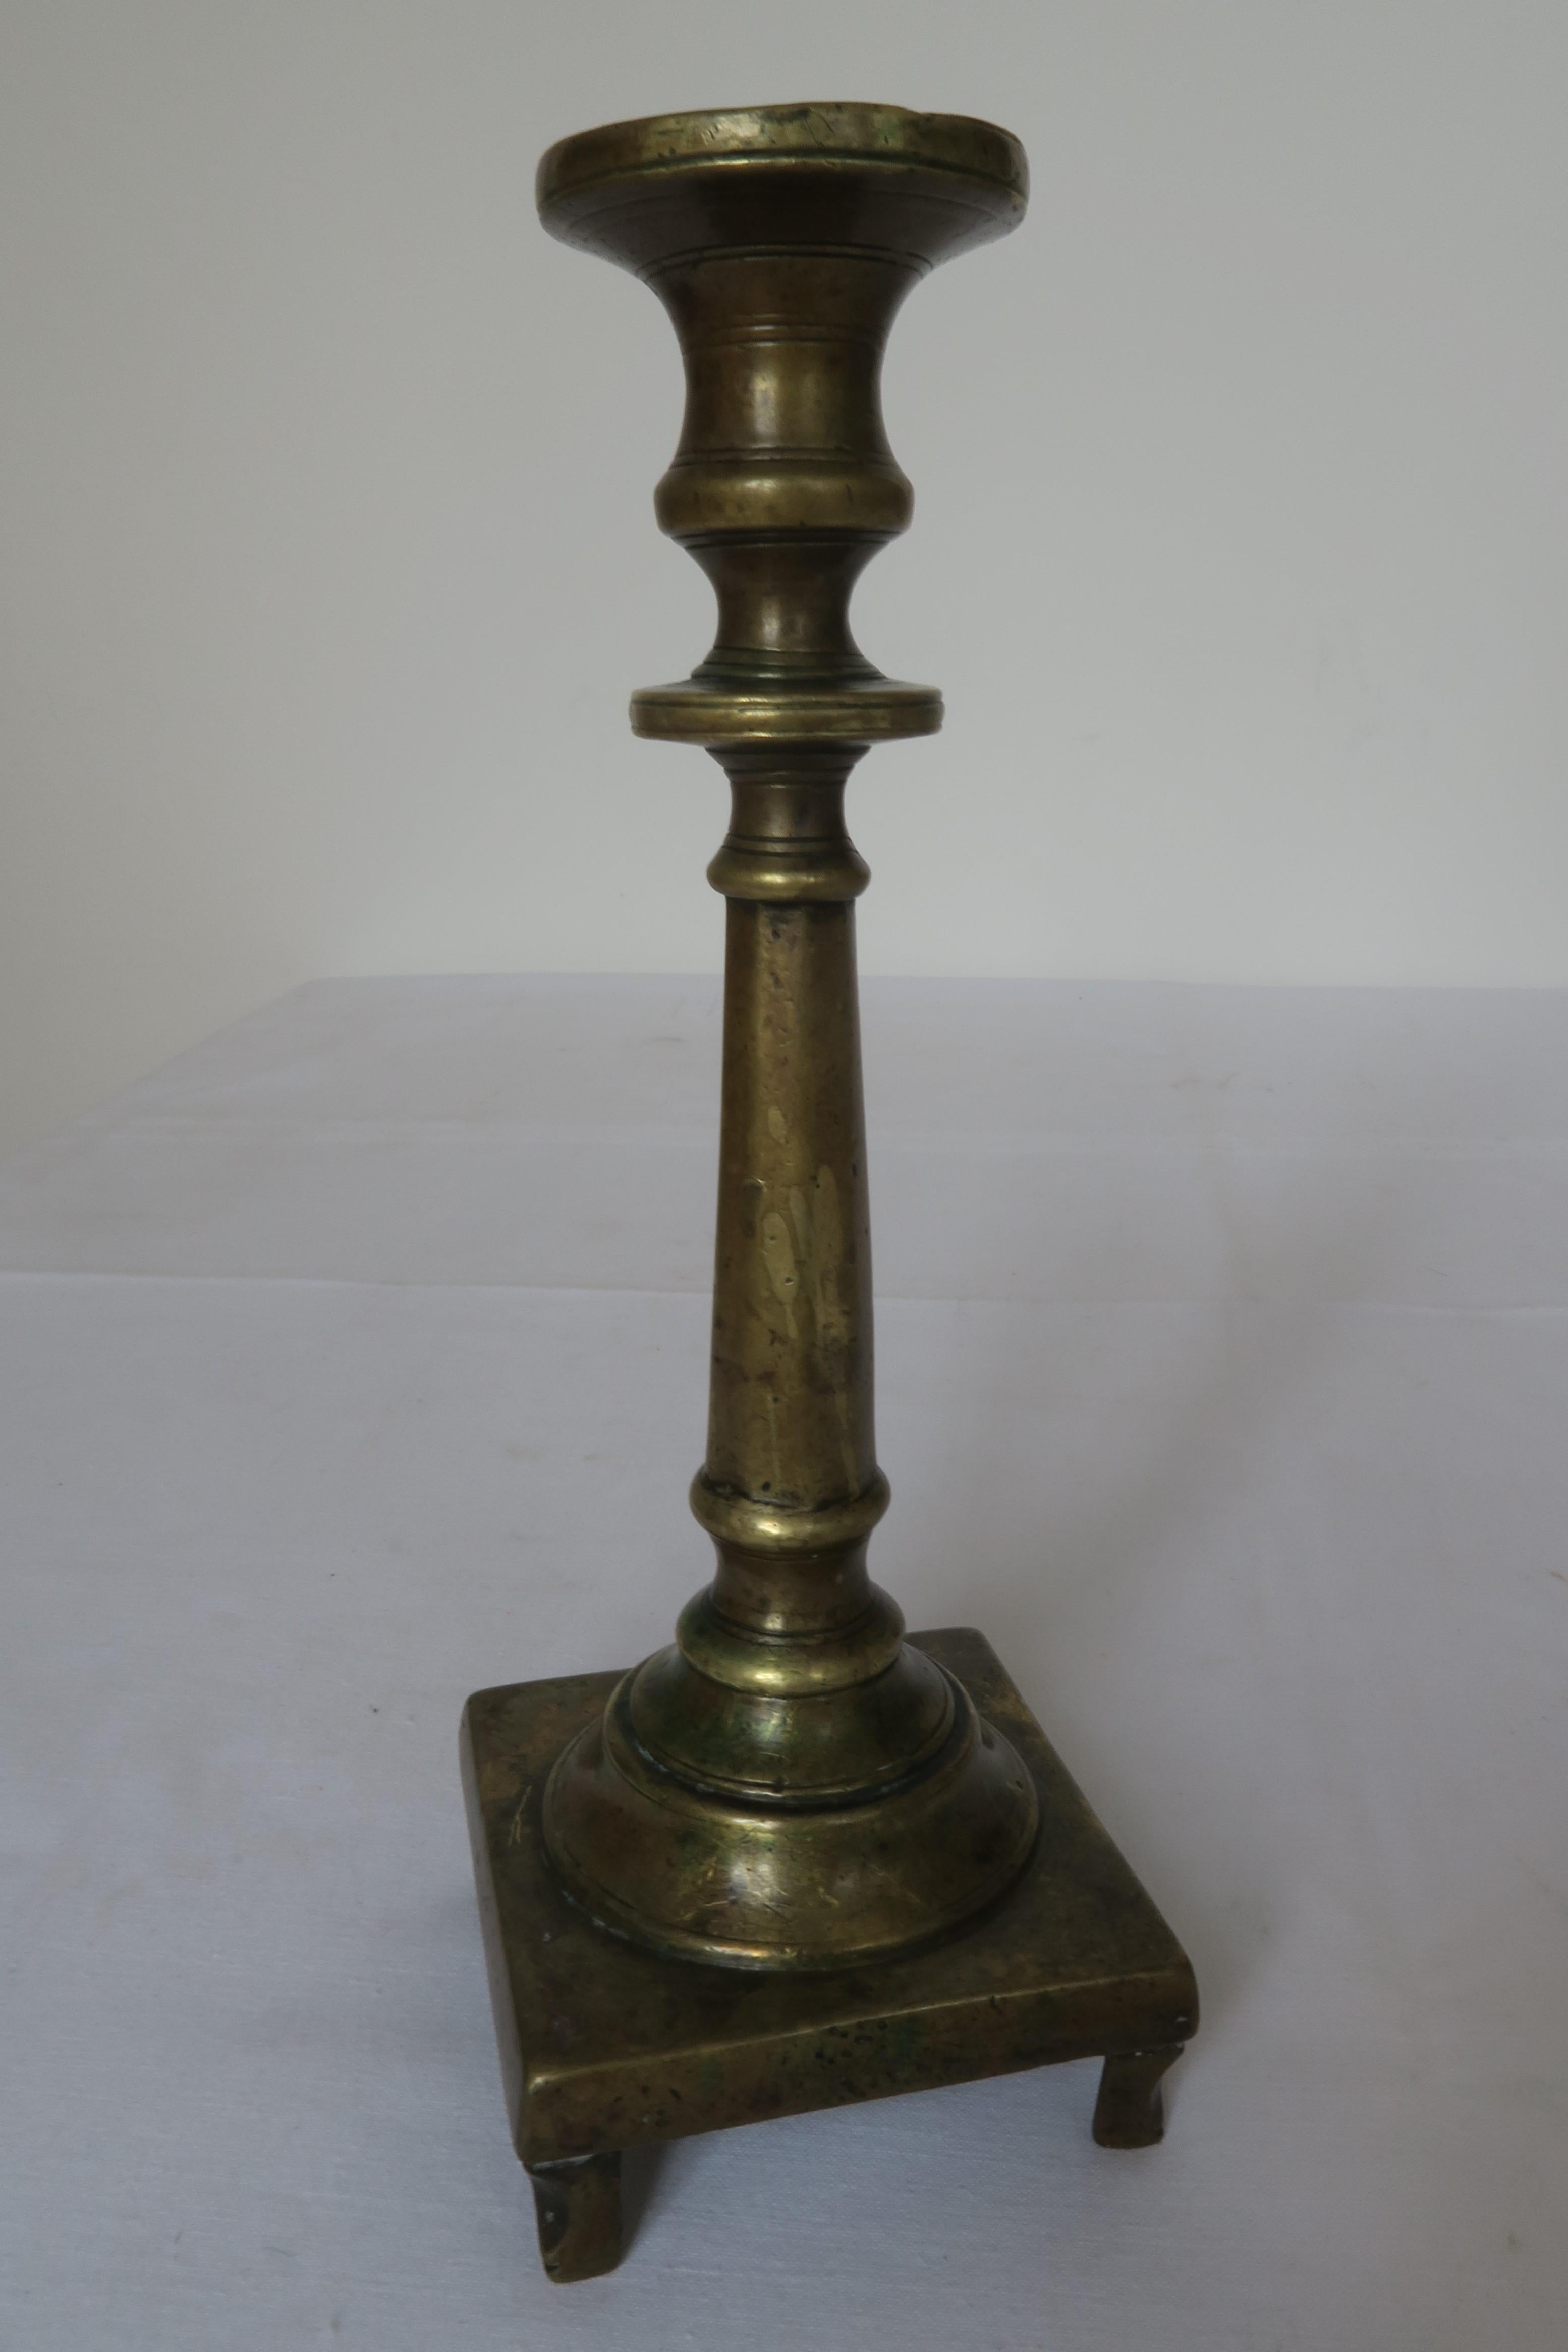 The item on sale is an original Gothic candelabra that dates back to the 1500s. It was expertly handcrafted from brass and consists of two parts that screw onto each other smoothly (see images). The ornaments are reduced and typical for the period.